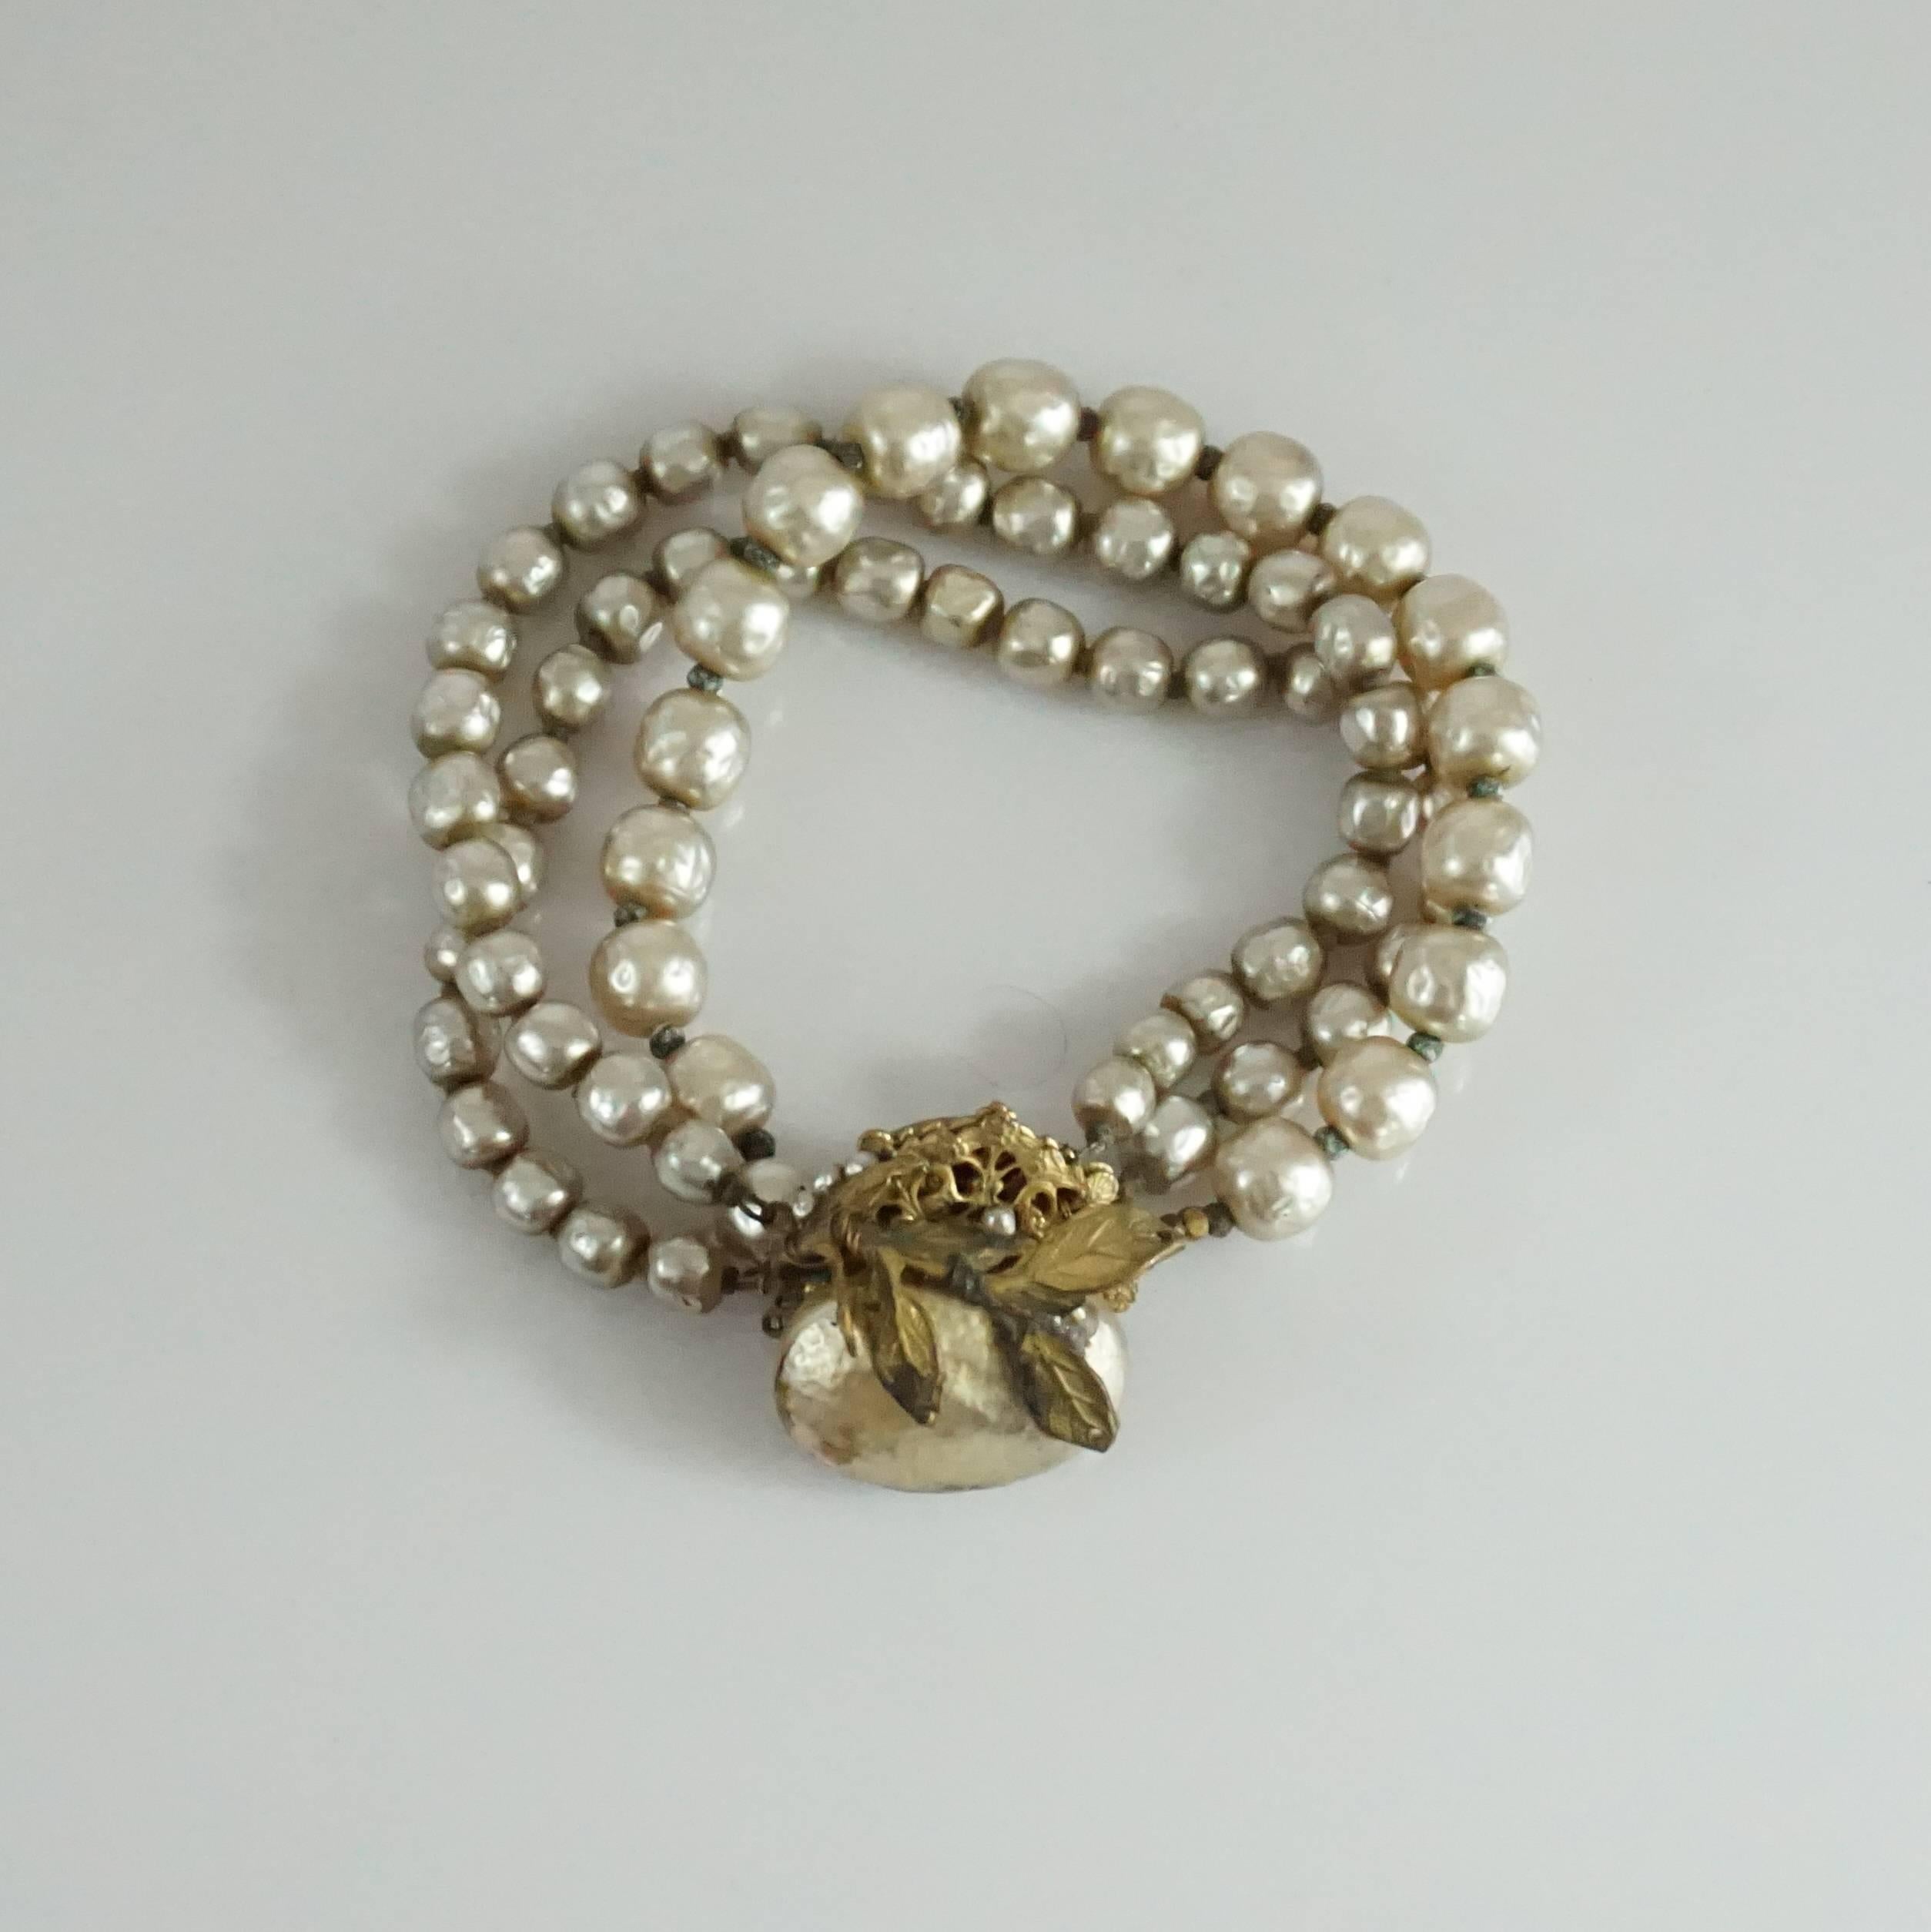 This Miriam Haskell cream pearl bracelet has 3 strands of pearls. It has a large center pearl with a gold leaf that is the clasp of the bracelet. The bracelet is in fair vintage condition with some general chipping to the strands, chipping on the